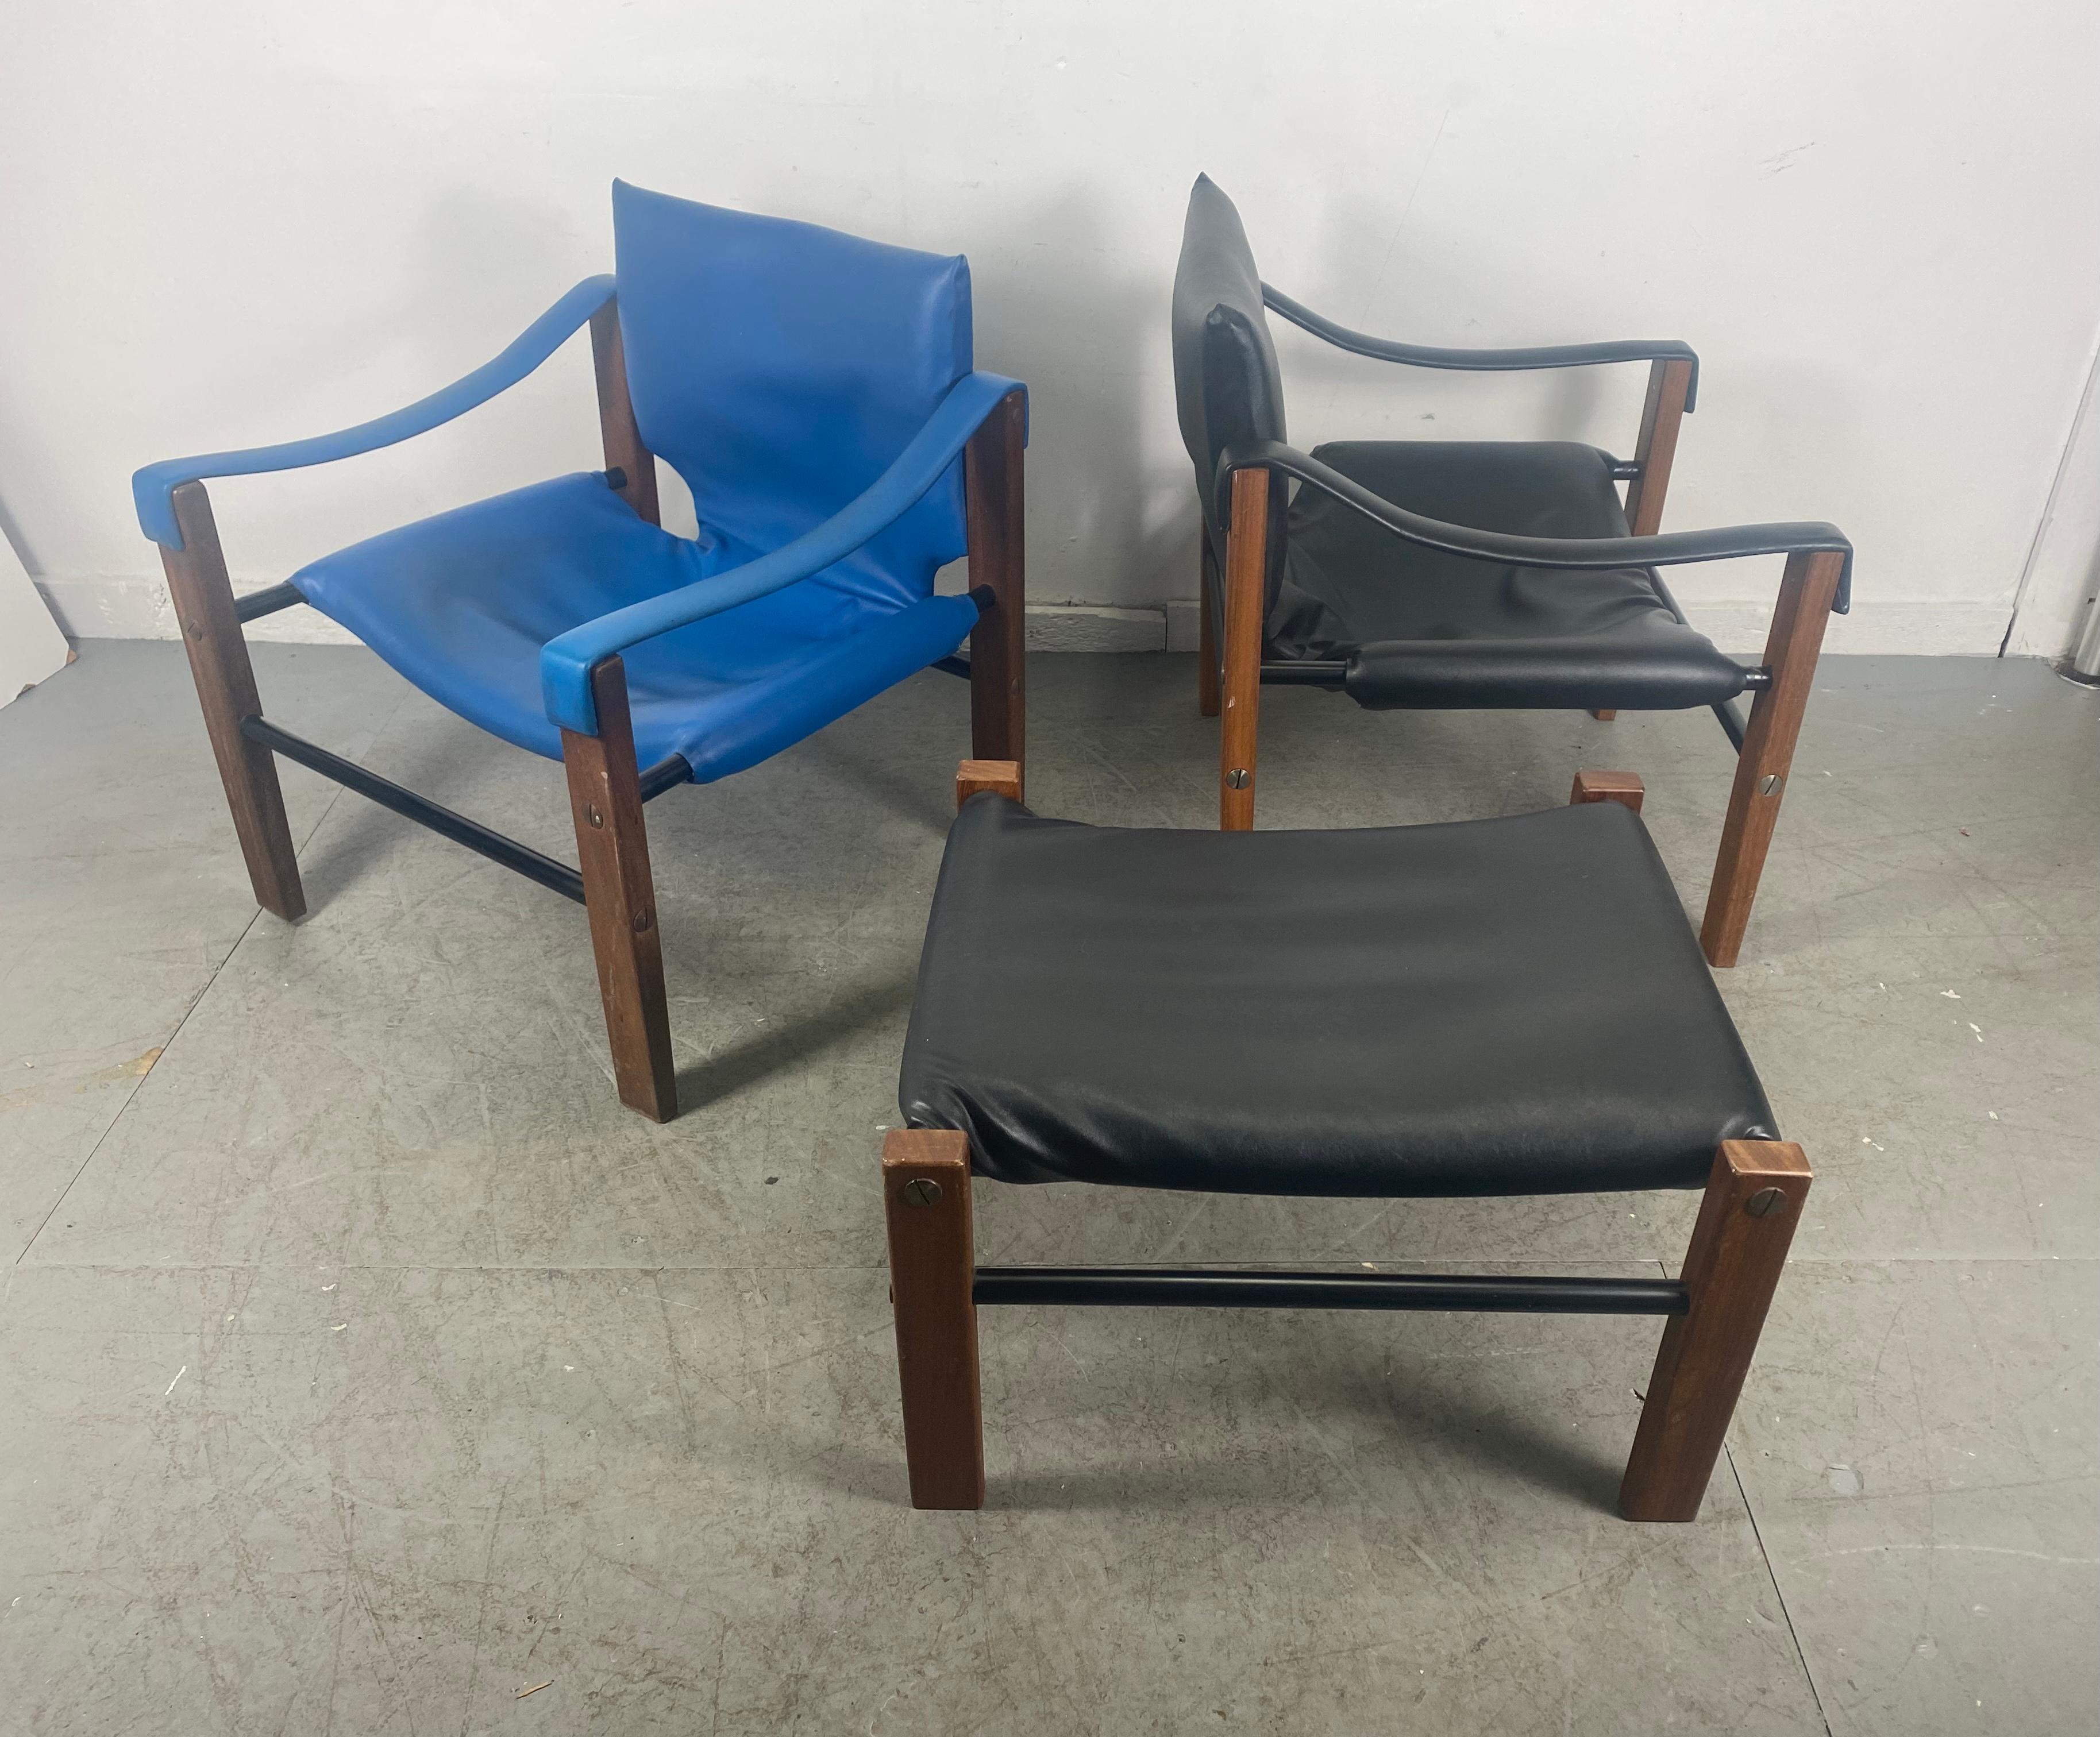 Pair Safari chairs and ottoman By Maurice Burke for Arkana 1970's. Nice pair retains original naugahyde in great condition. Both chairs have impressed mark / maker. Extremely comfortable. Minor bumps and bruises to teal frames. Hand delivery avail